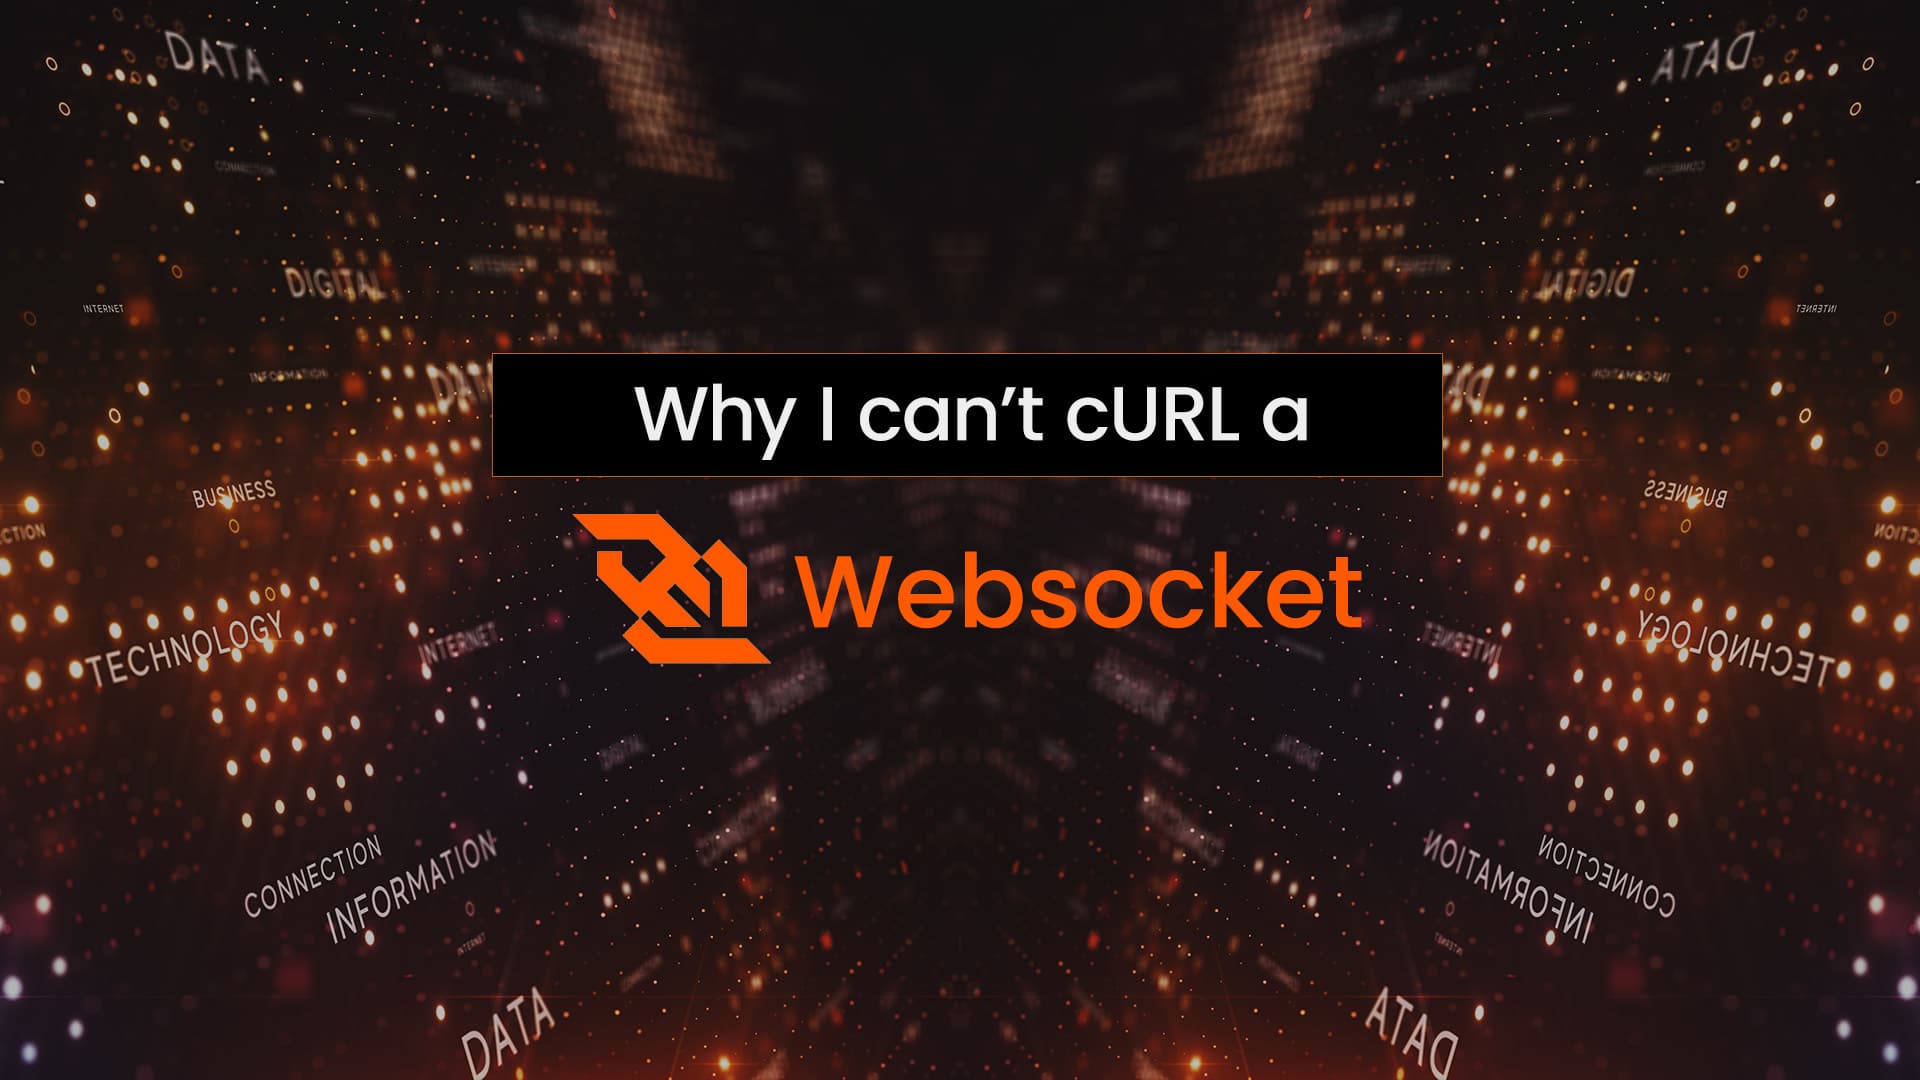 Why I can't cURL a Websocket